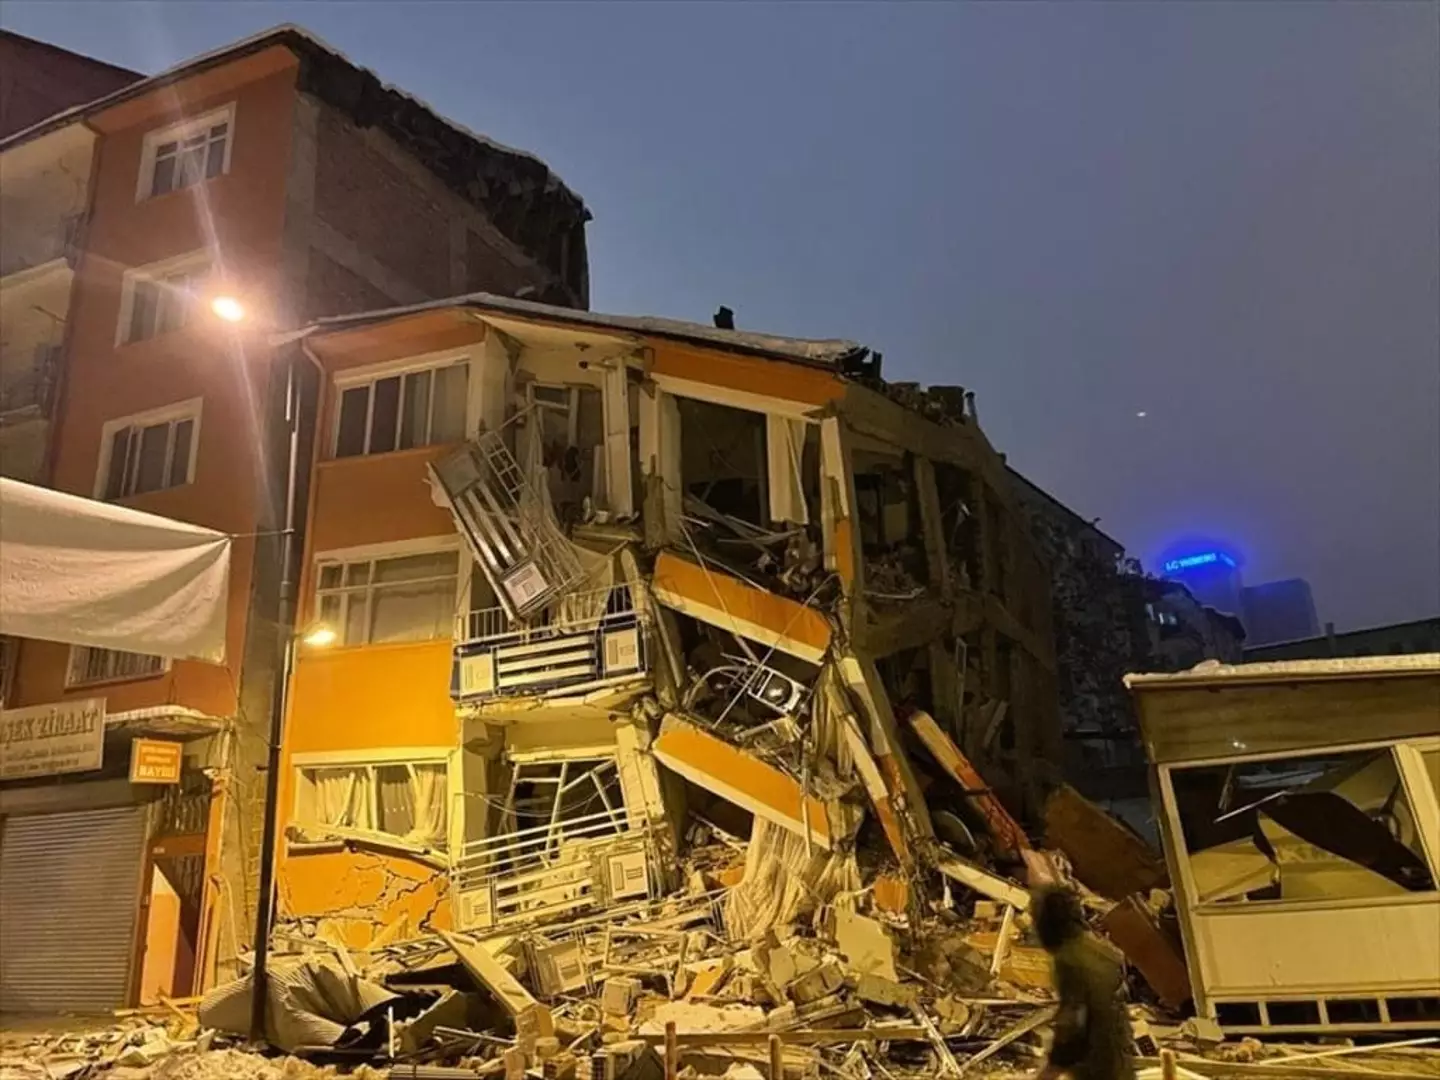 Houses were completely turned to rubble by the powerful quake.